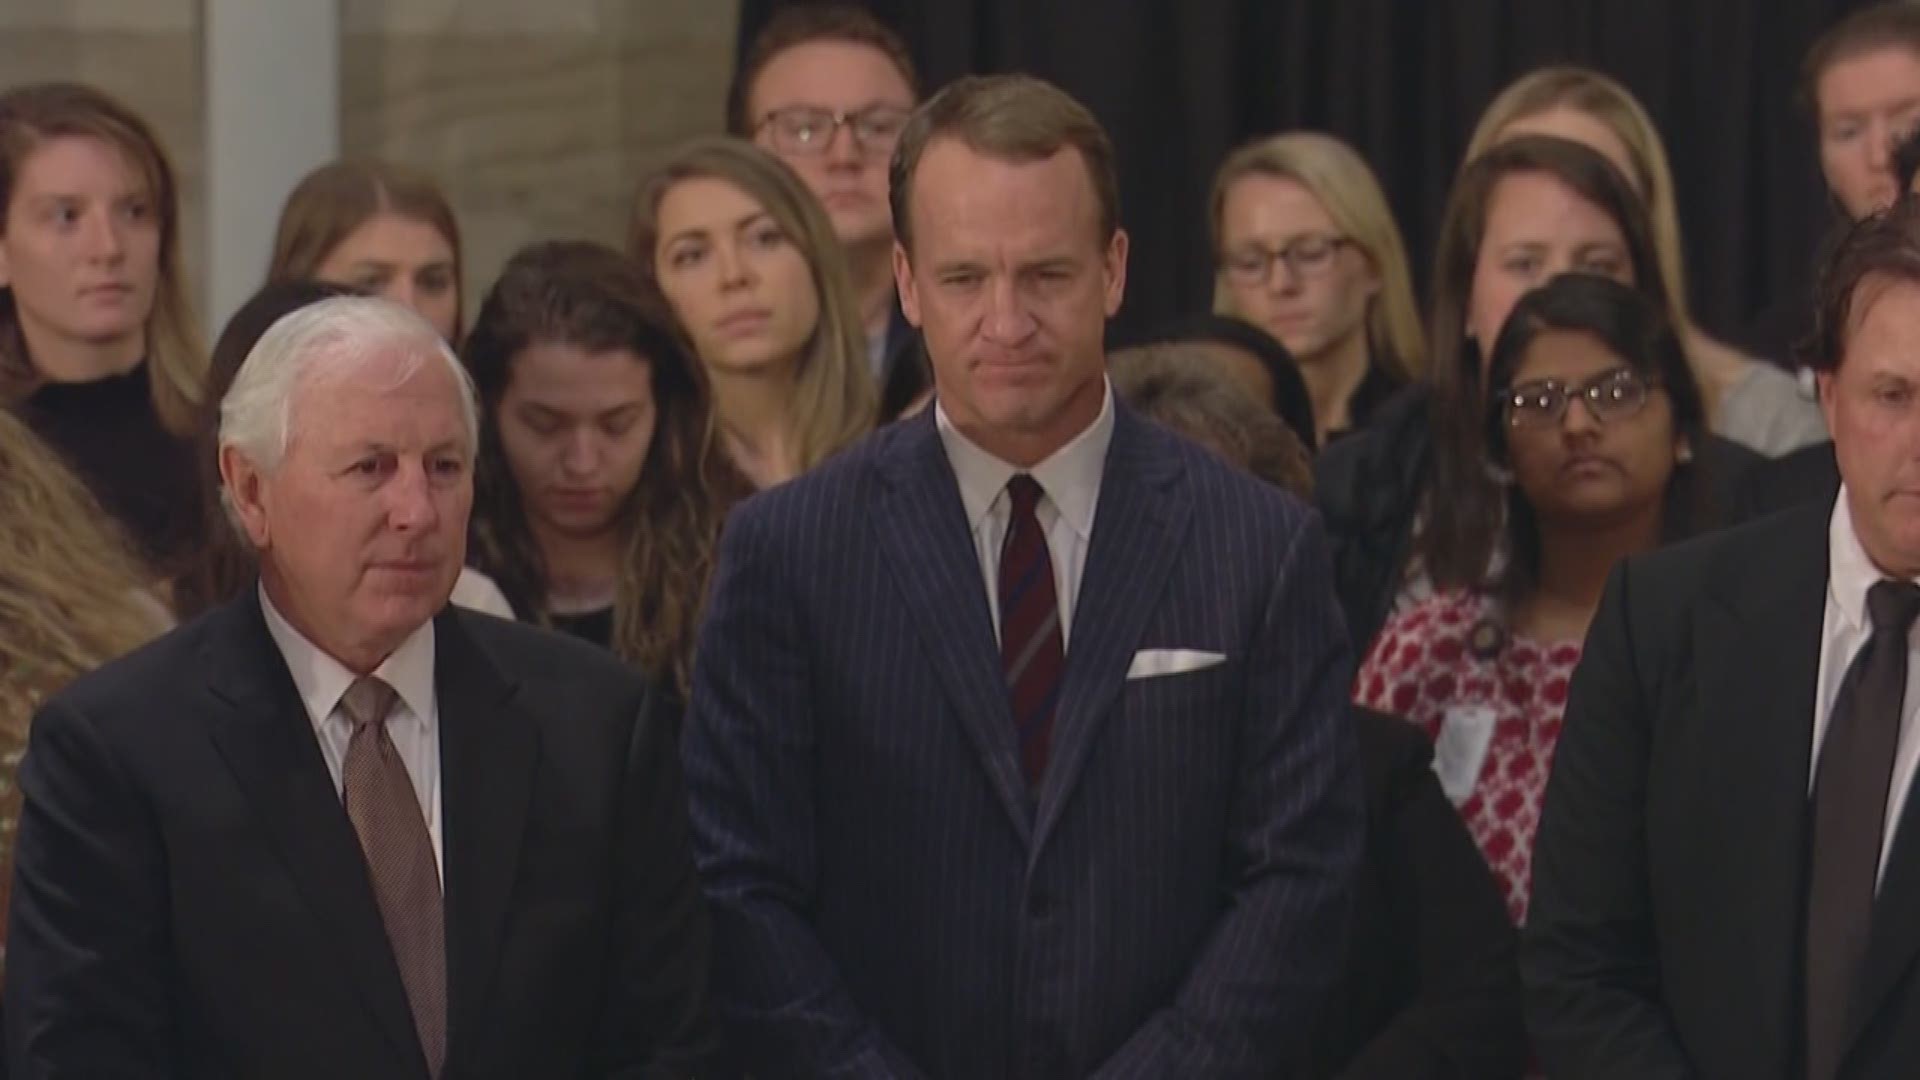 Celebrities from the world of sports visited the Capitol Rotunda to say their final farewell to former U.S. President George H.W. Bush.